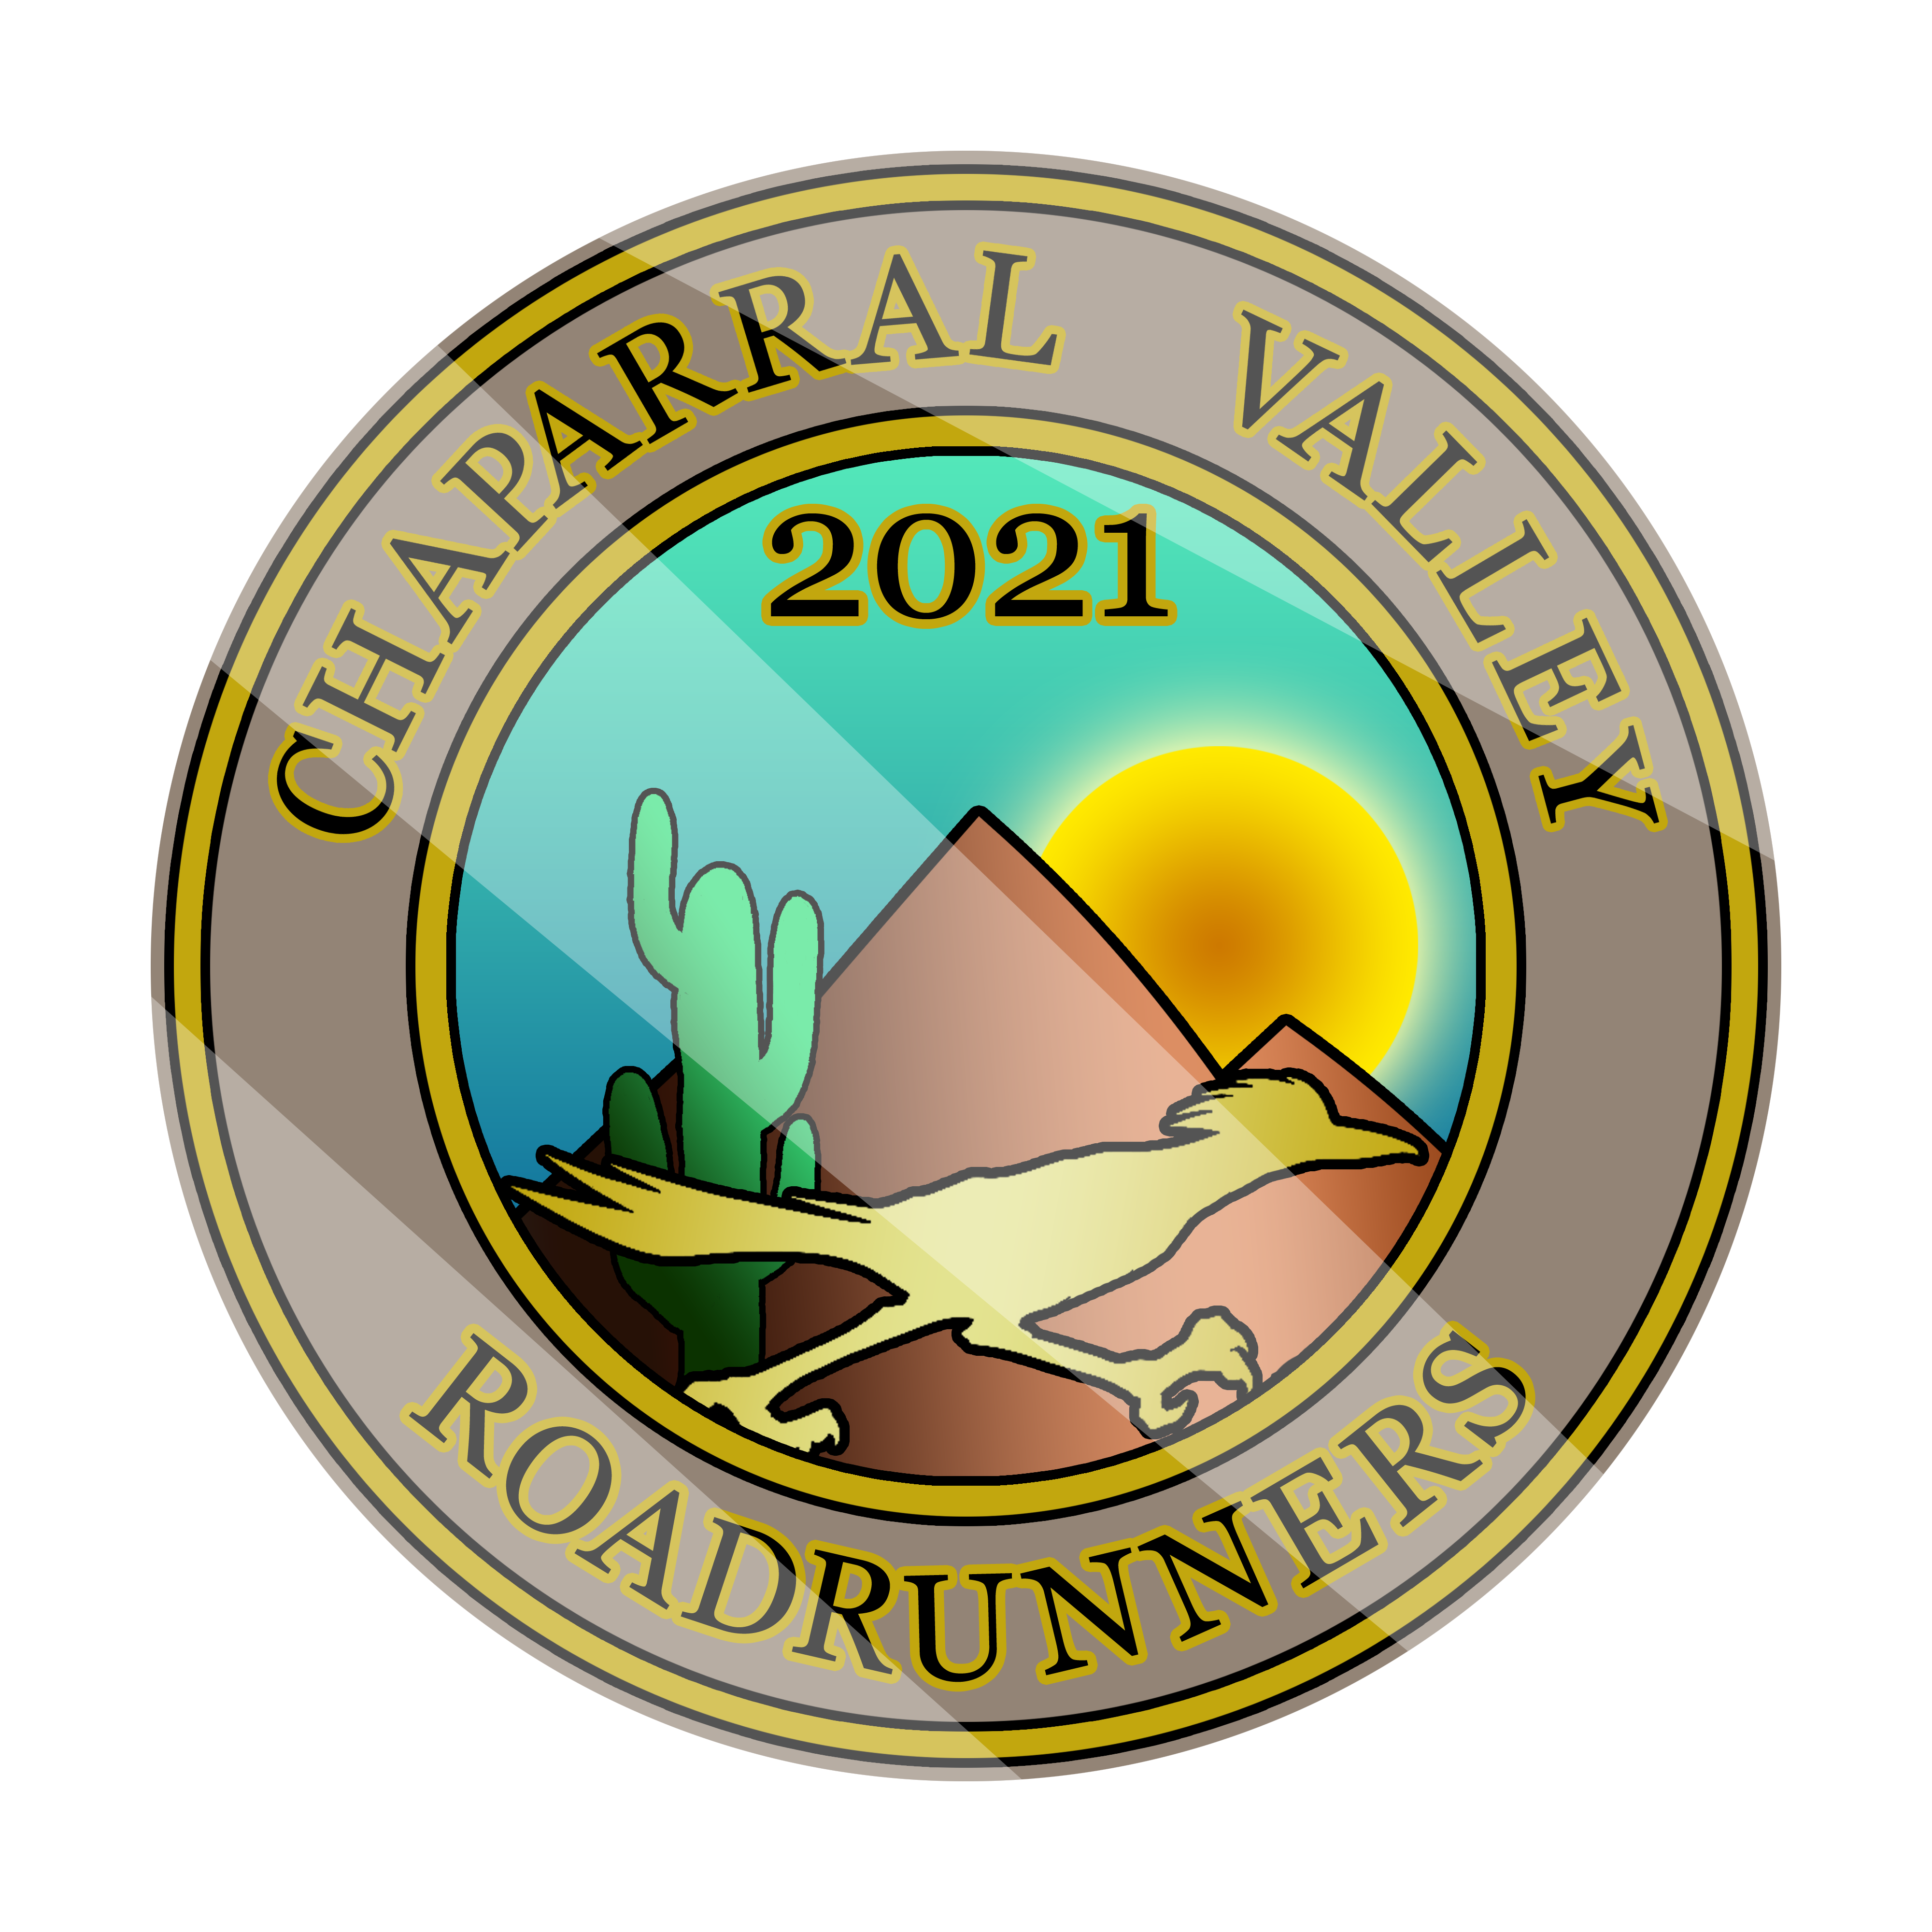 Chaparral Valley Roadrunners